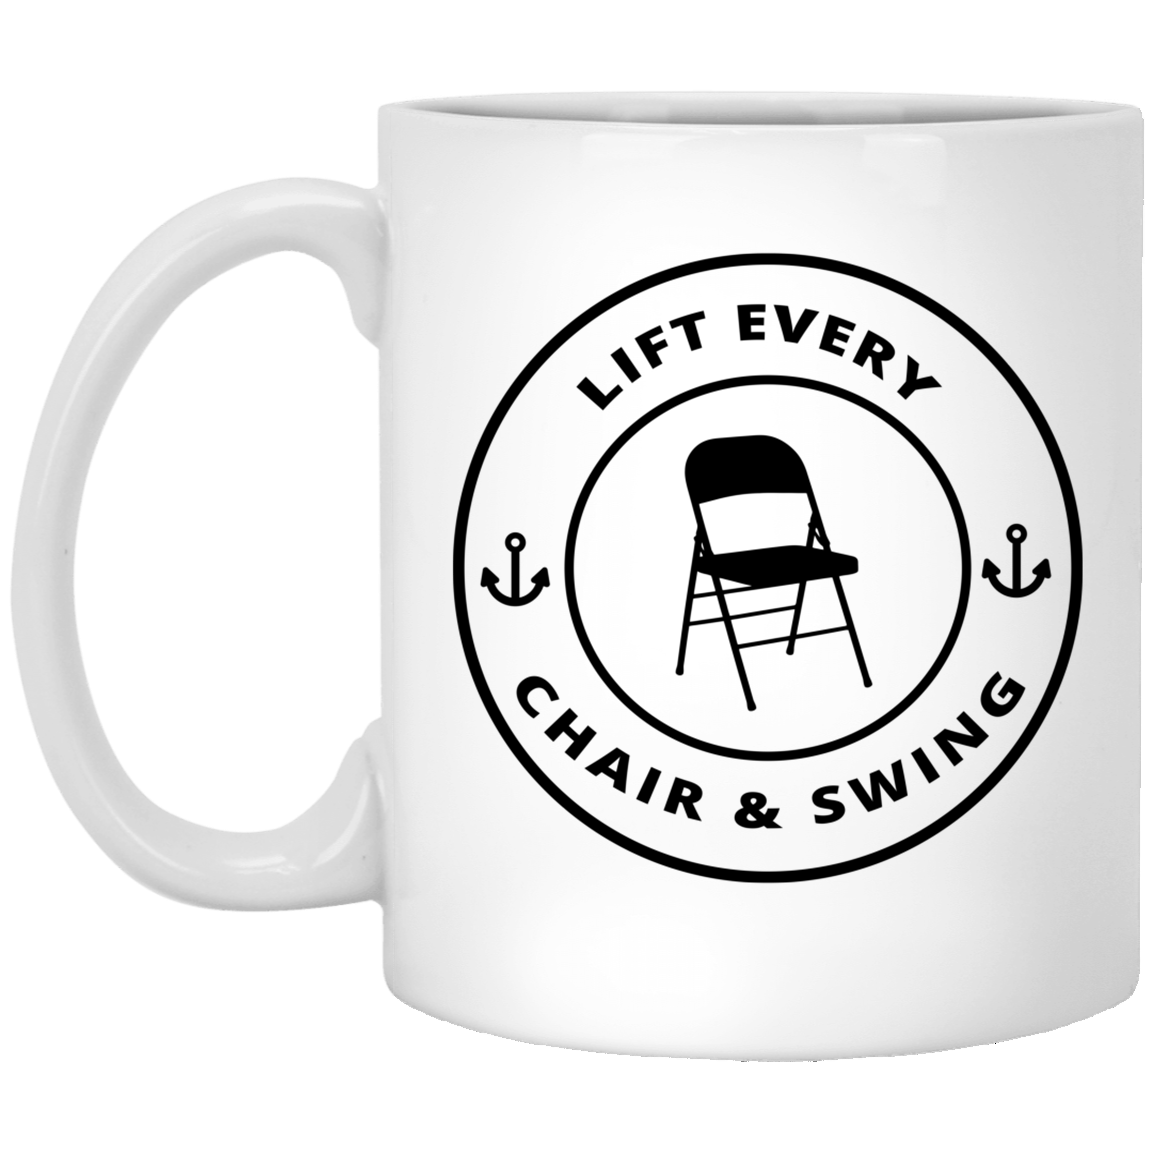 Lift Every Chair